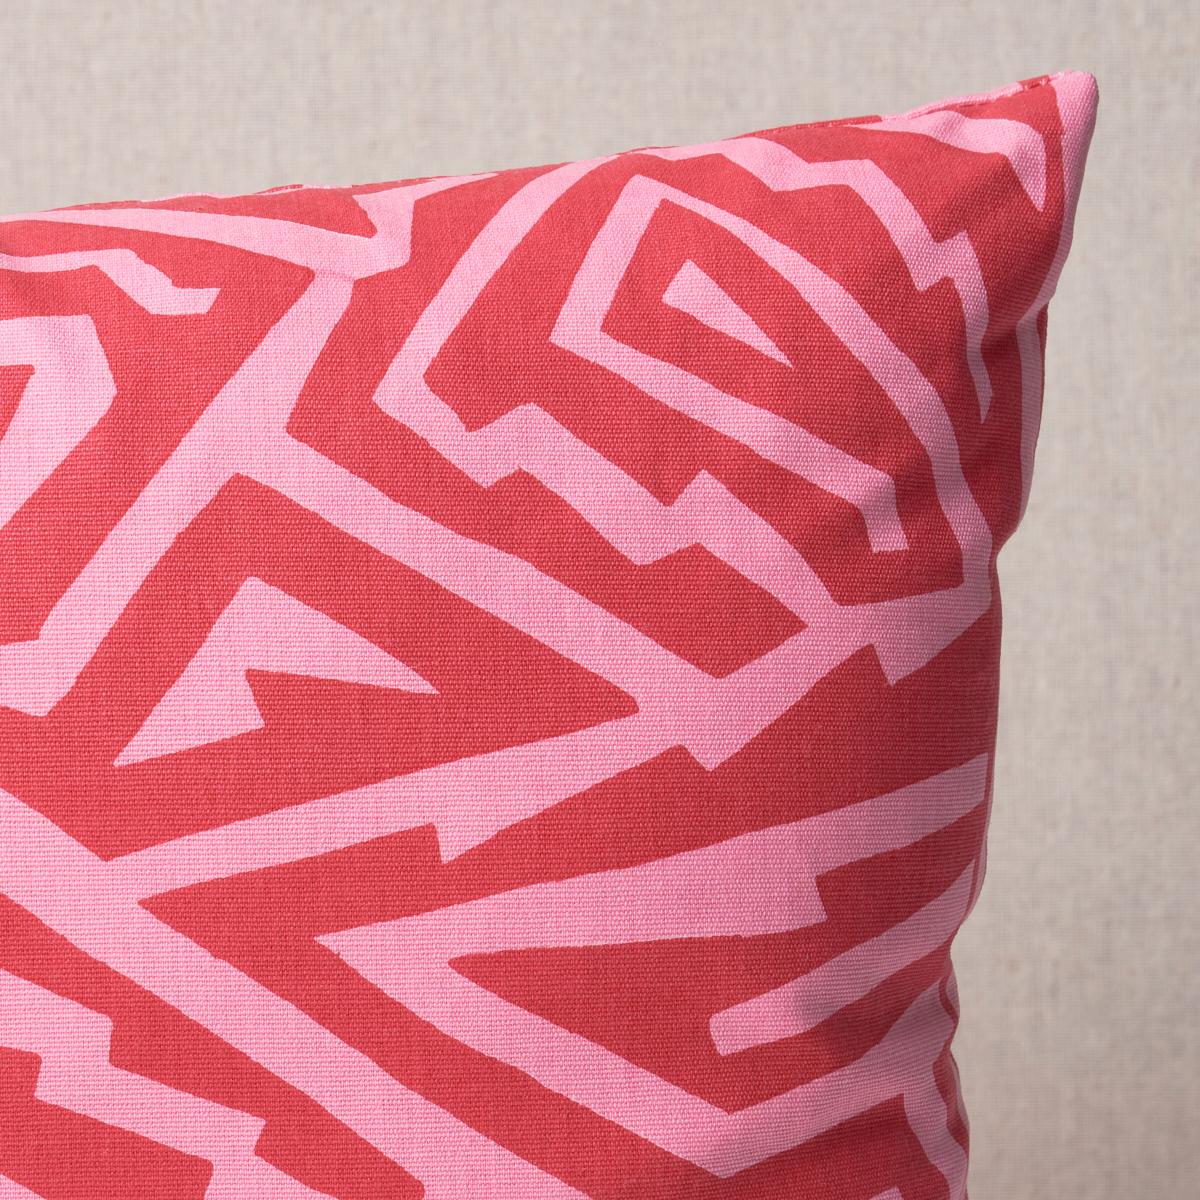 This pillow features Jagged Maze by David Kaihoi for Schumacher with a knife edge finish. Filled with vibrating kinetic energy, Jagged Maze in brown was designed by David Kaihoi and inspired by the pottery of ancestral Pueblo people. Done in a